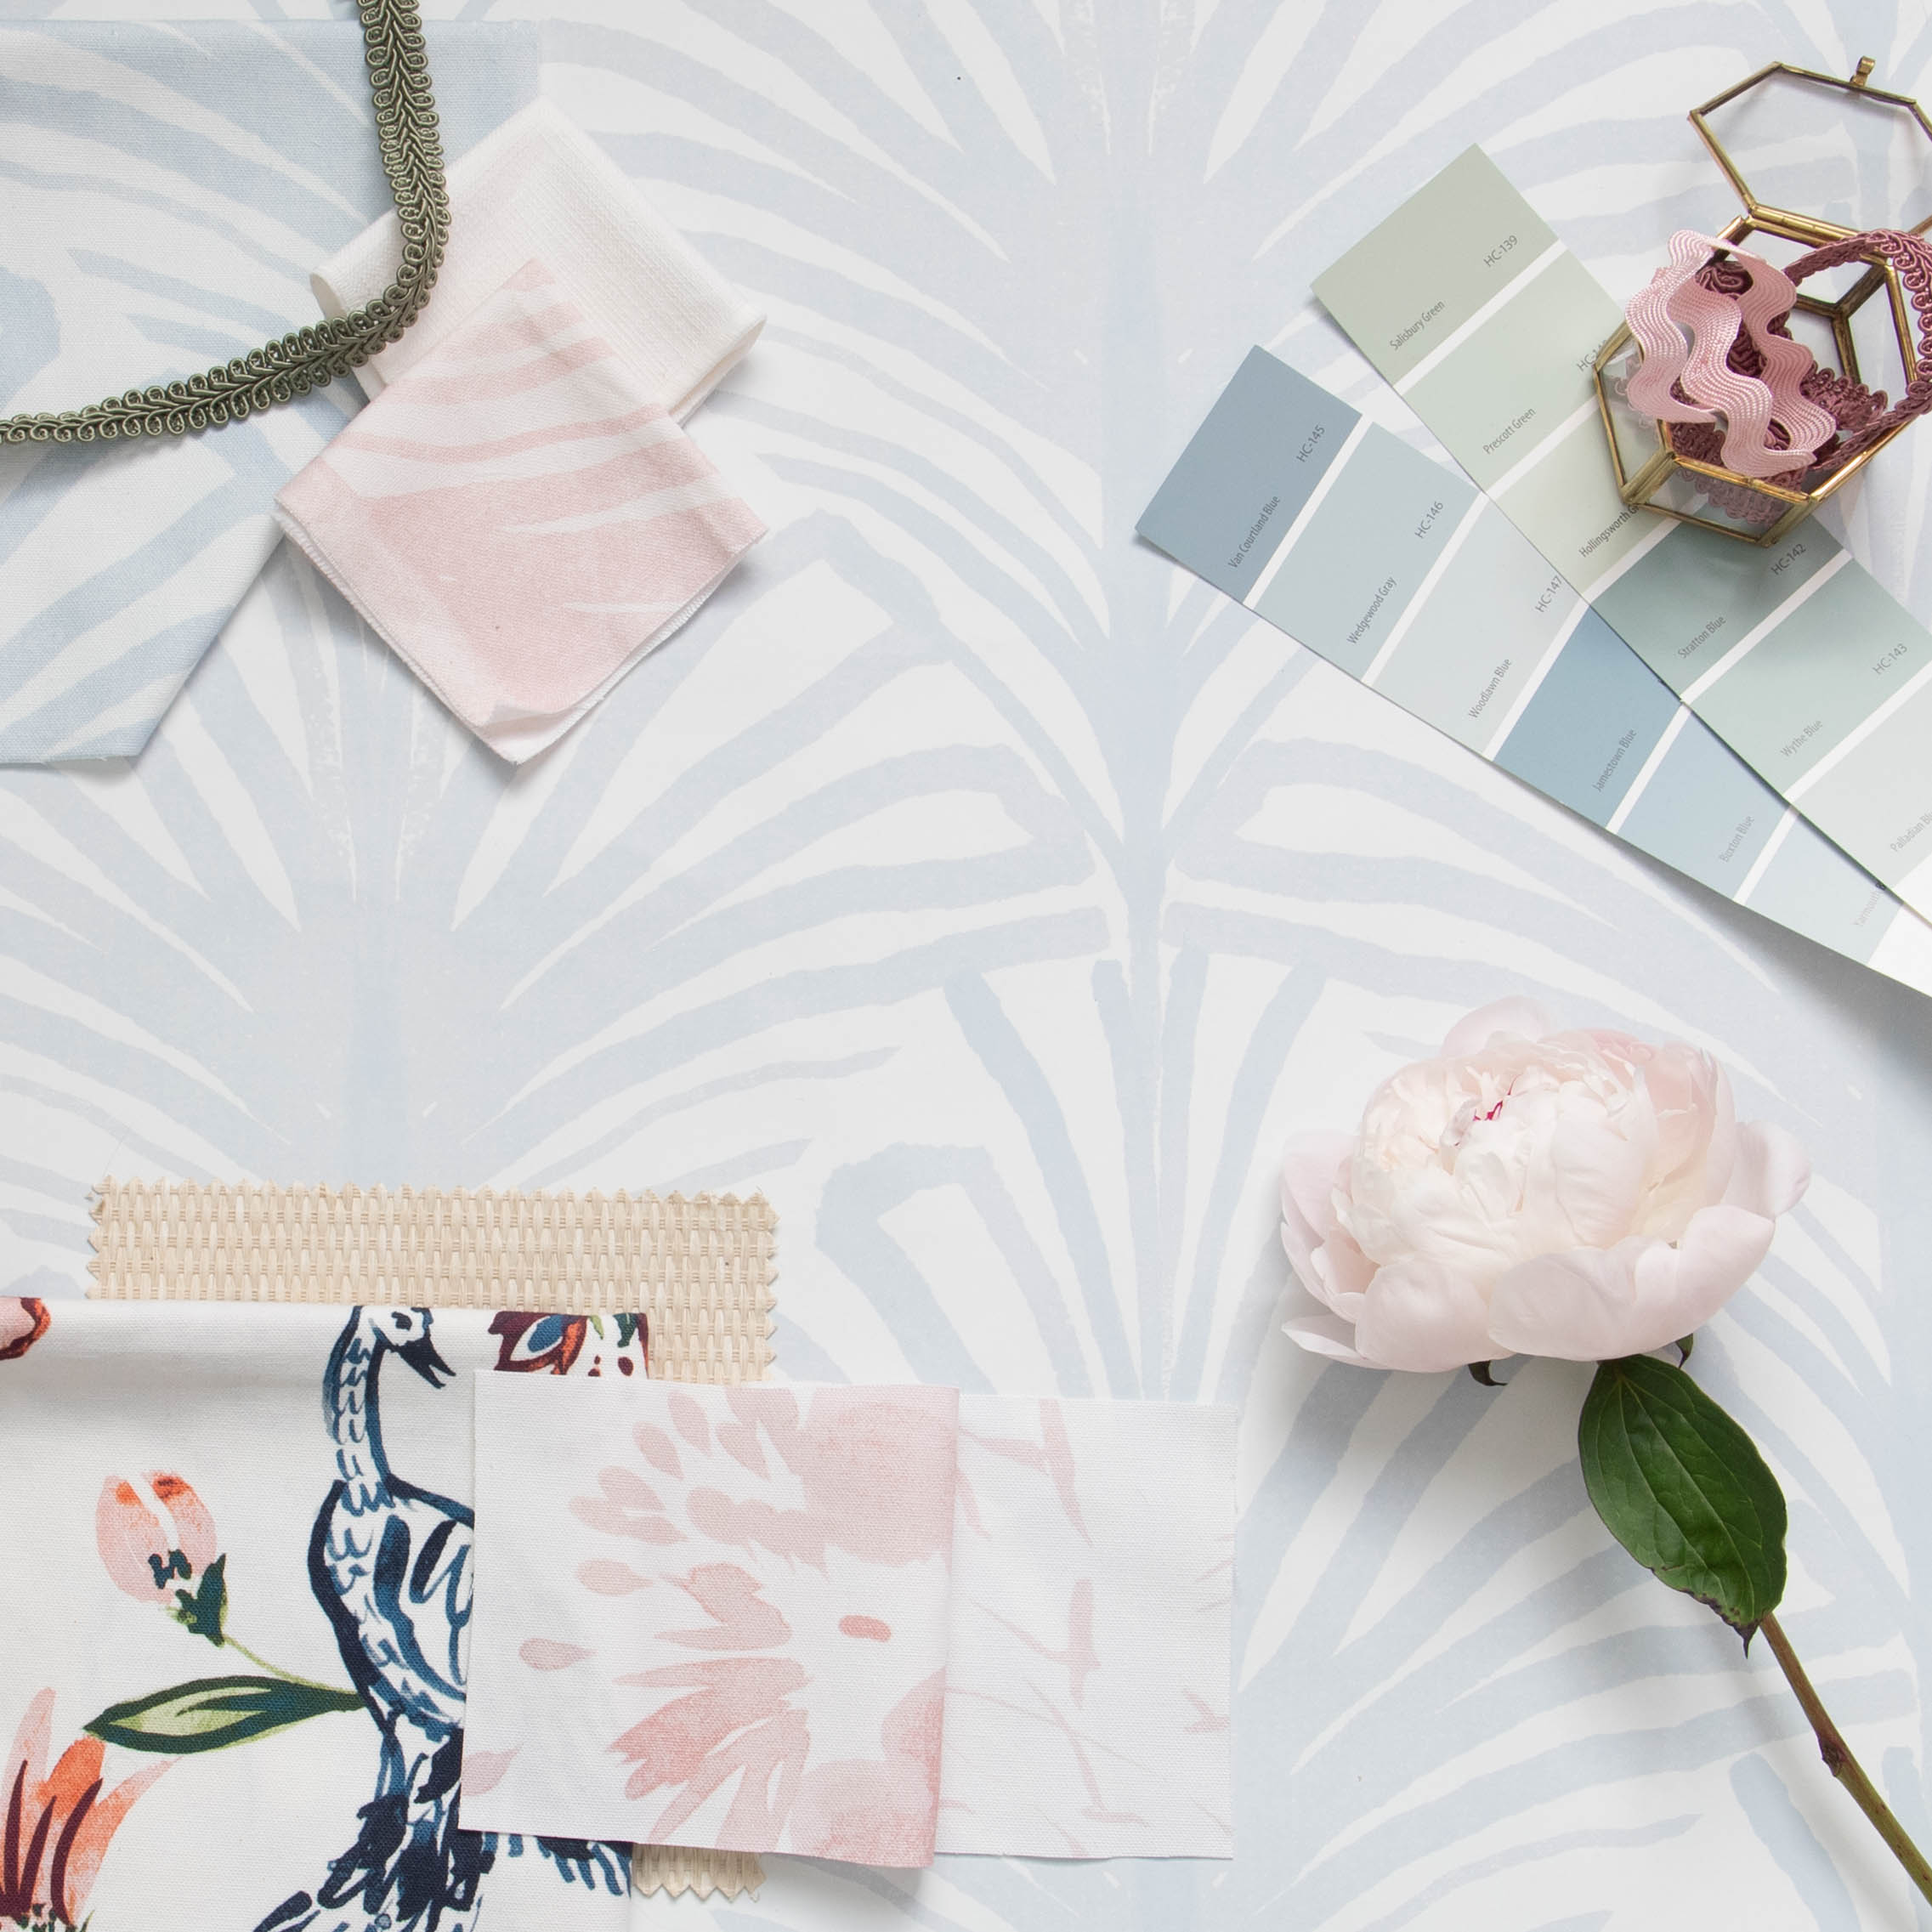 Interior design moodboard and fabric inspirations with Rose Pink Palm Printed Swatch, Sky Blue Palm Printed Swatch, and Cream Chinoiserie Printed Swatch